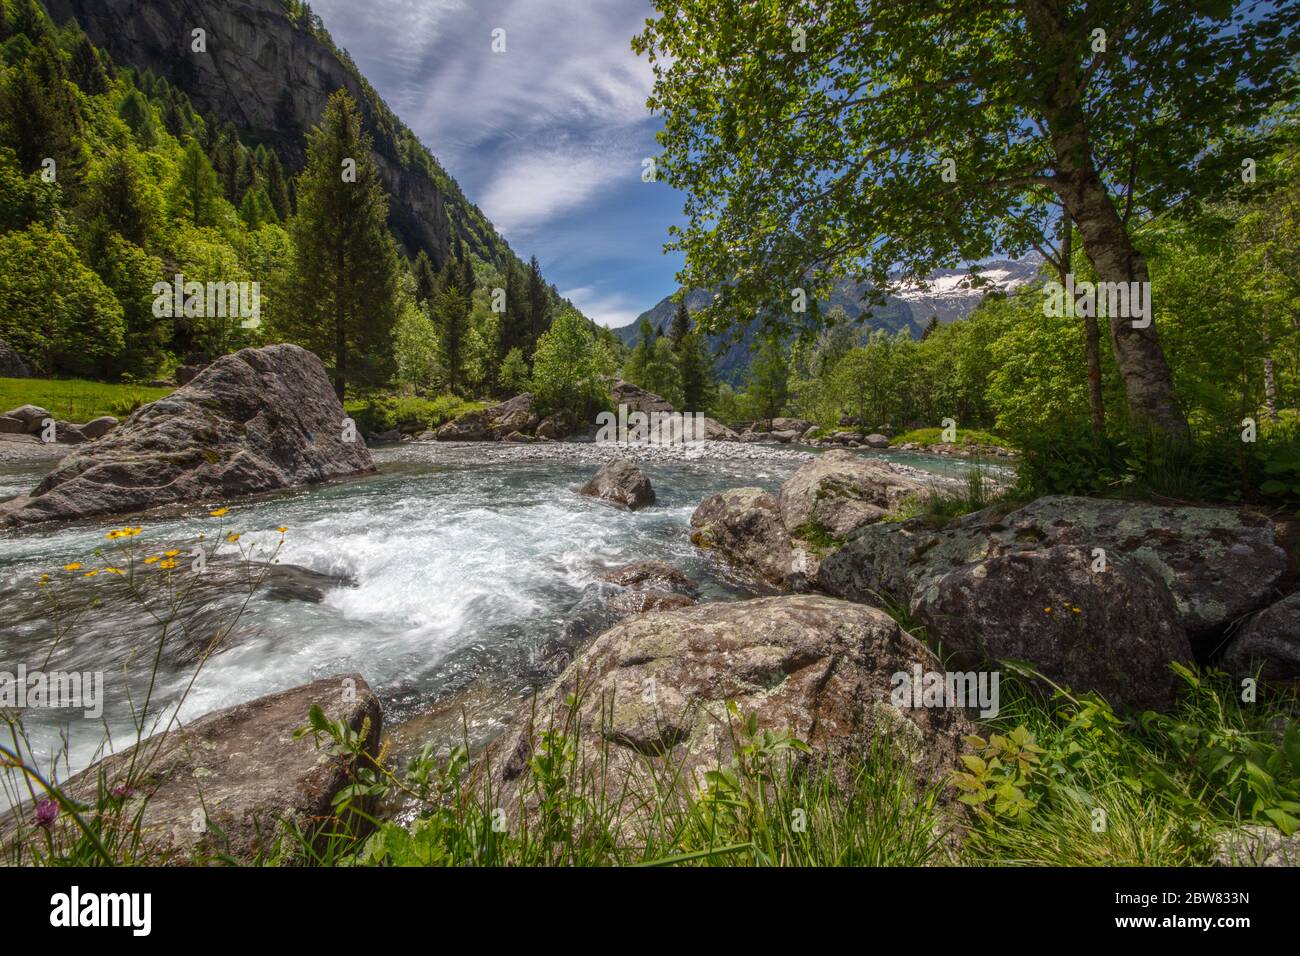 a fantastic wide angle picture of the mountains of Val di Mello, Valtellina, Italy Stock Photo